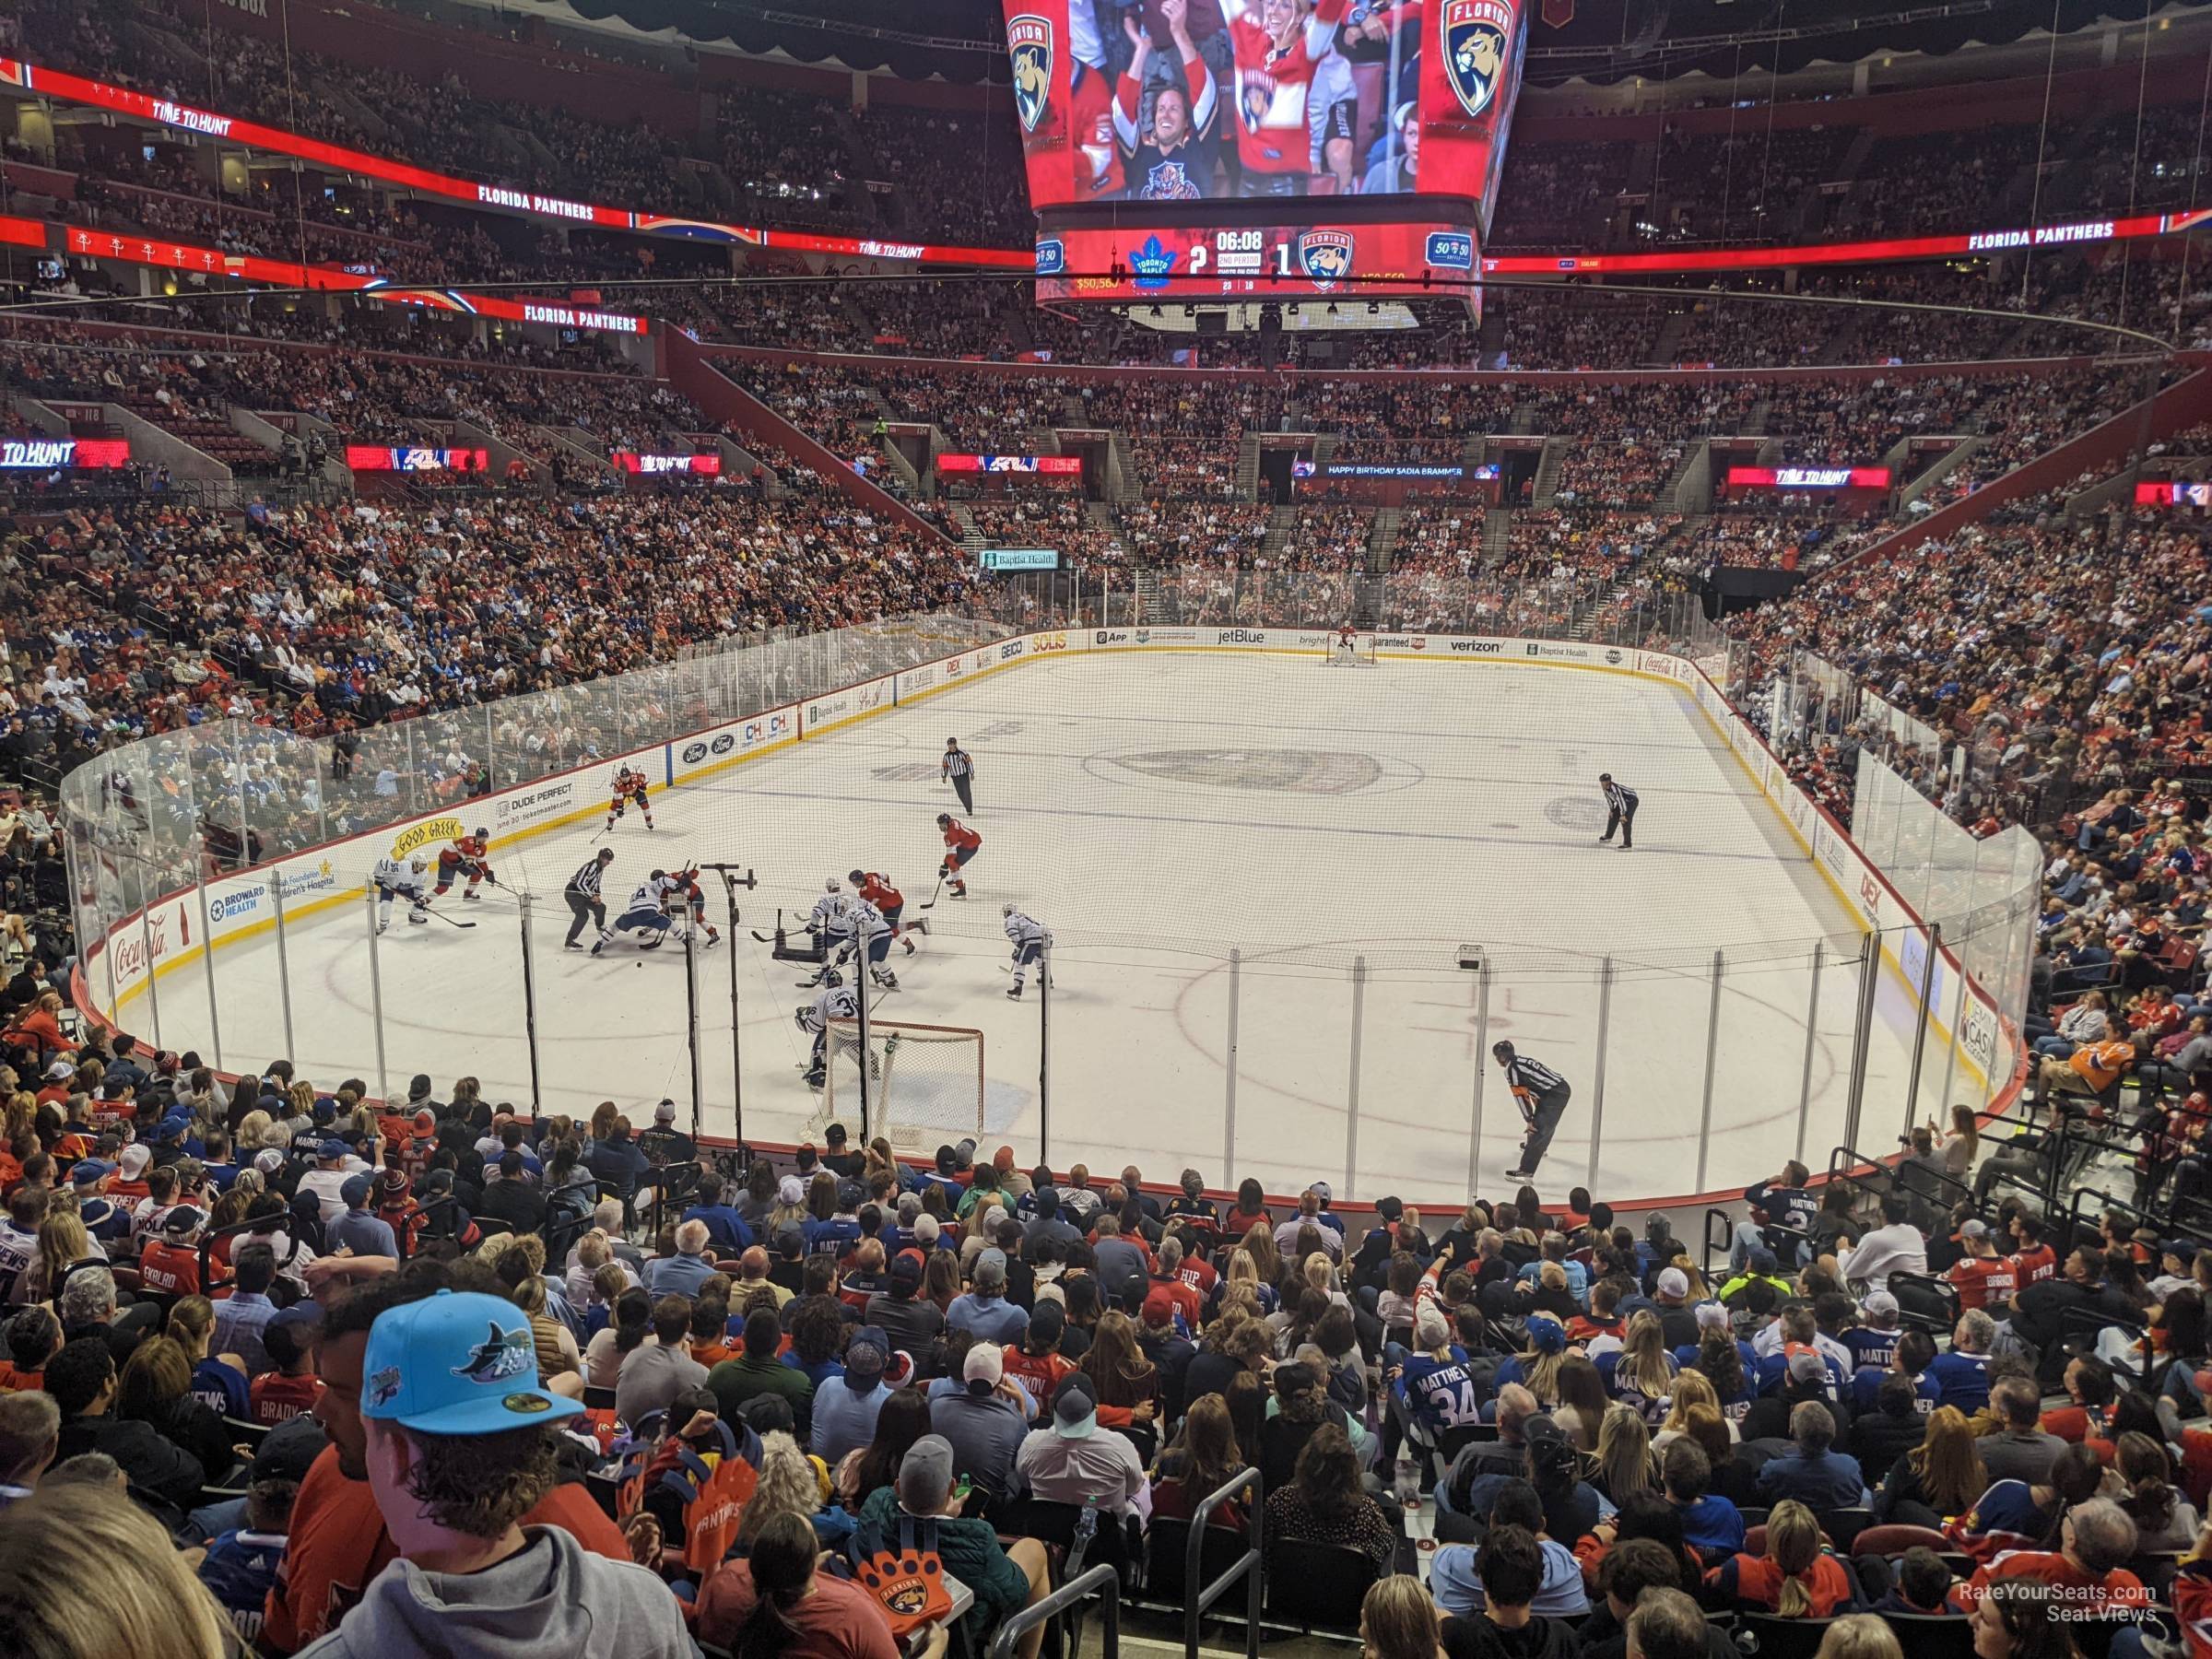 section 108, row 18 seat view  for hockey - fla live arena